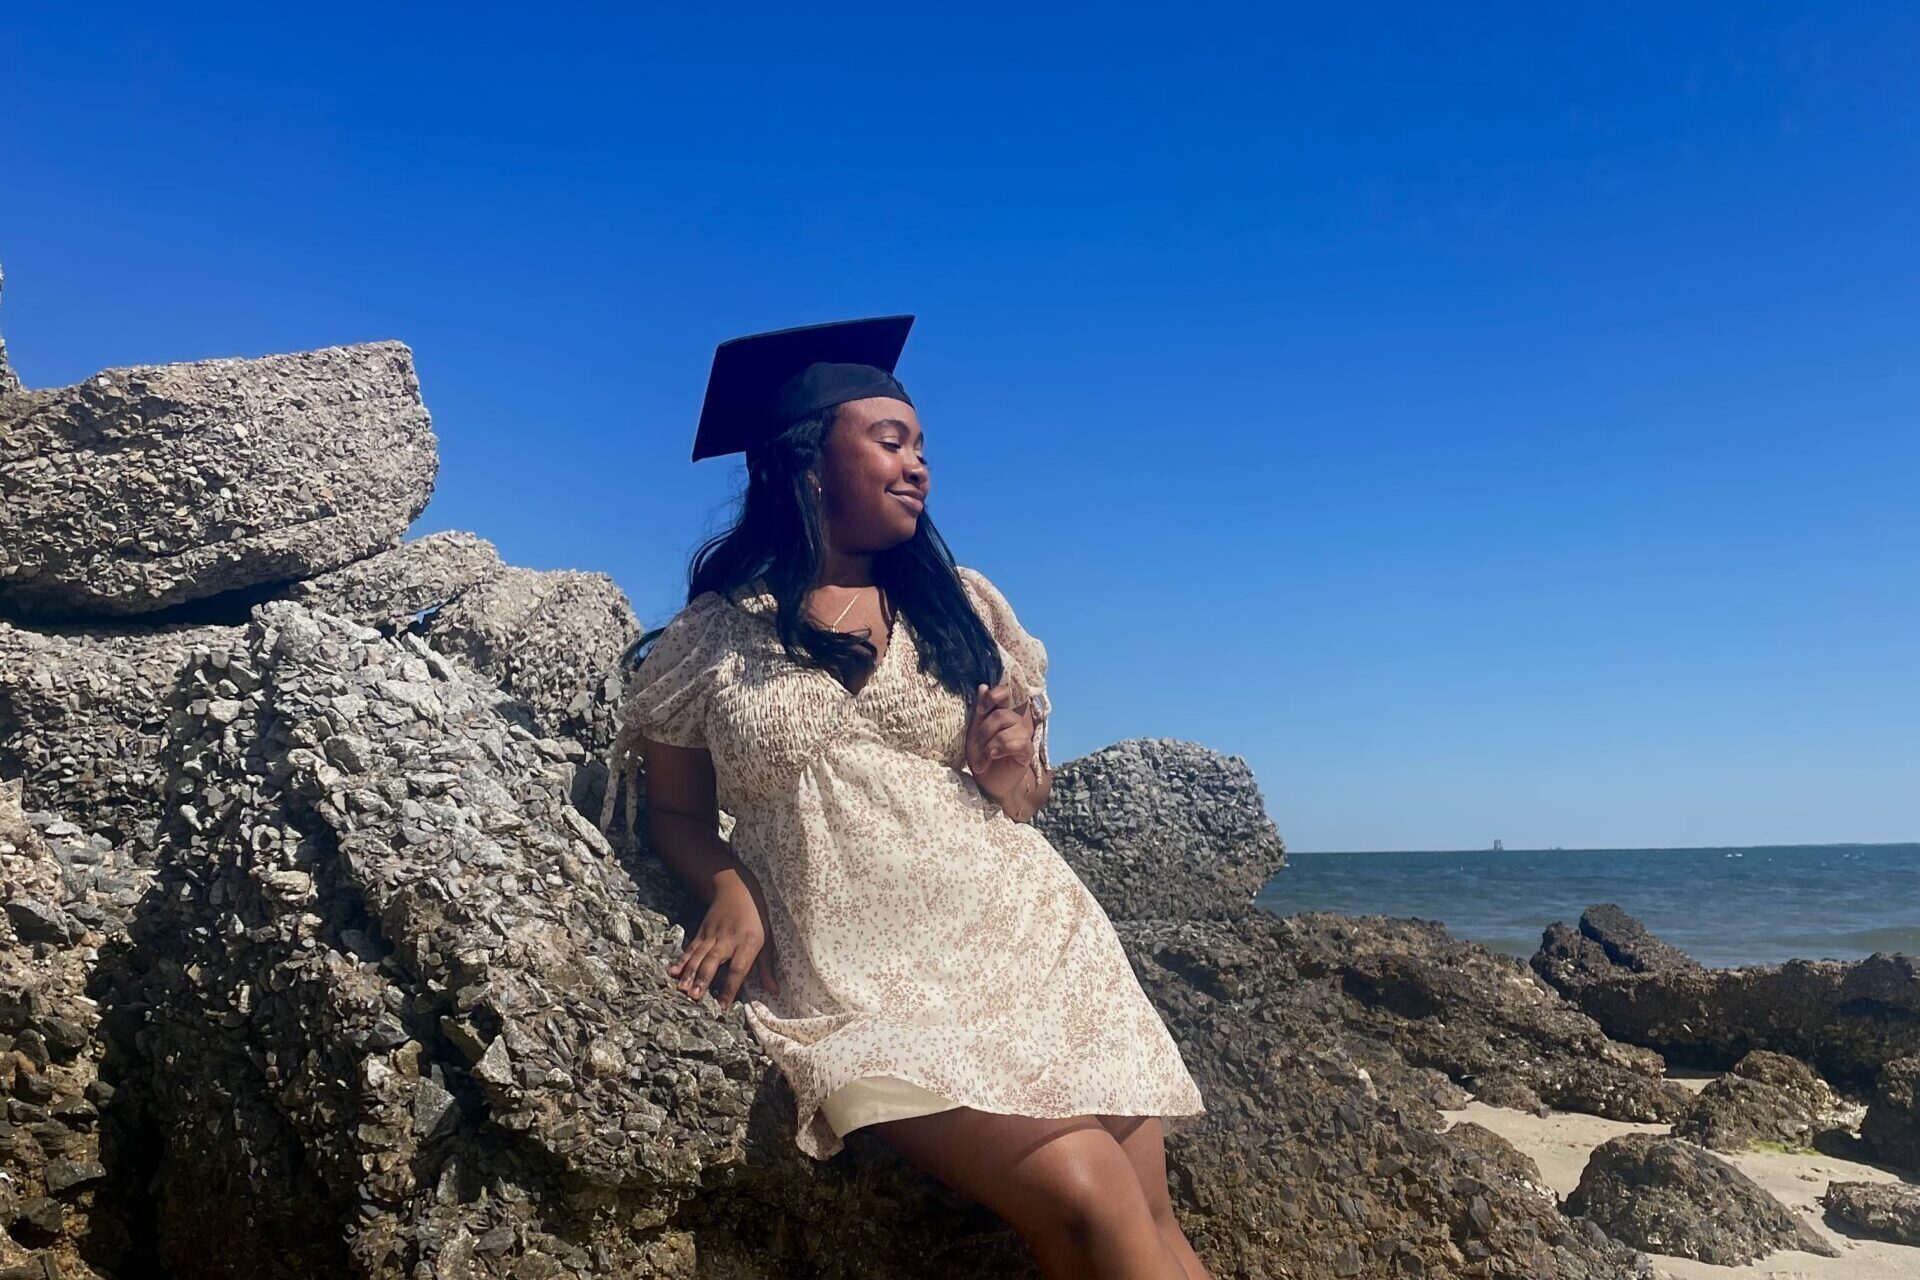 Victoria Jenkins taking a graduation photo on a beach, leaning up against several large rocks.